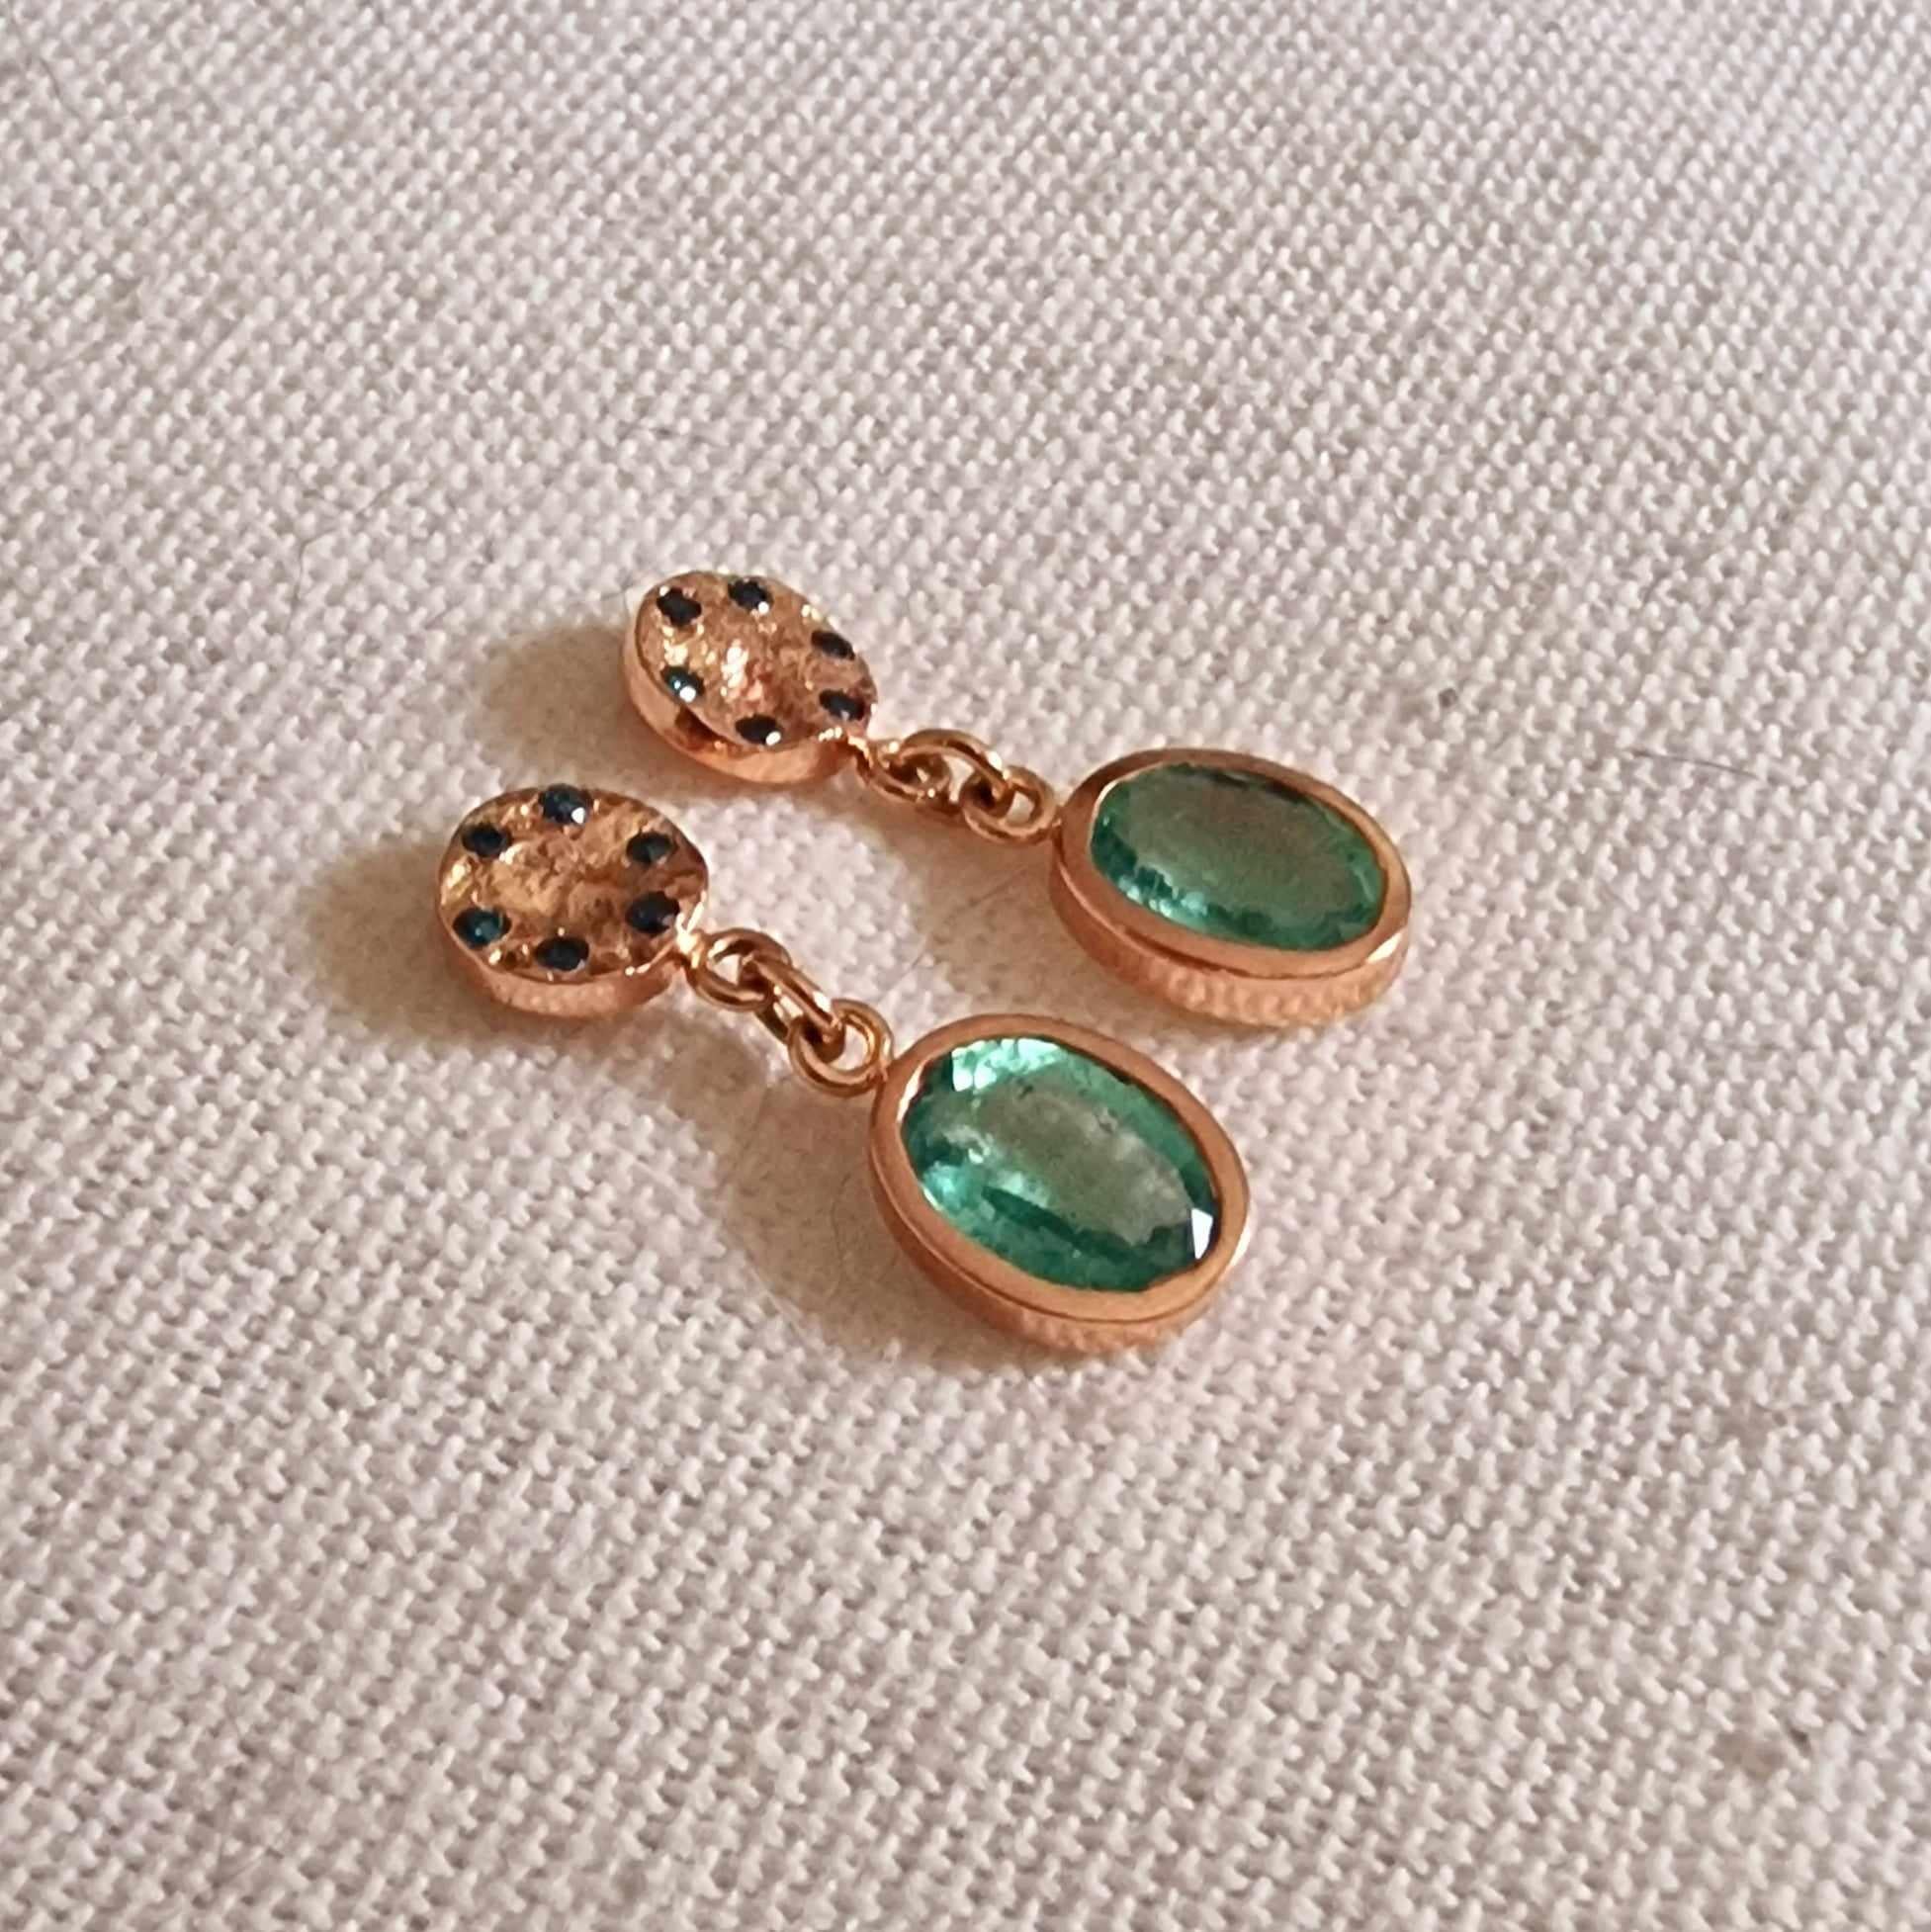 One-of-a-kind emerald and blue diamonds earrings, a unique pair of earrings that is ready to wear. Created with a design meant to be easy to wear everyday or to complete a smart attire! 

Elegant drop and dangle earrings featuring oval cut green